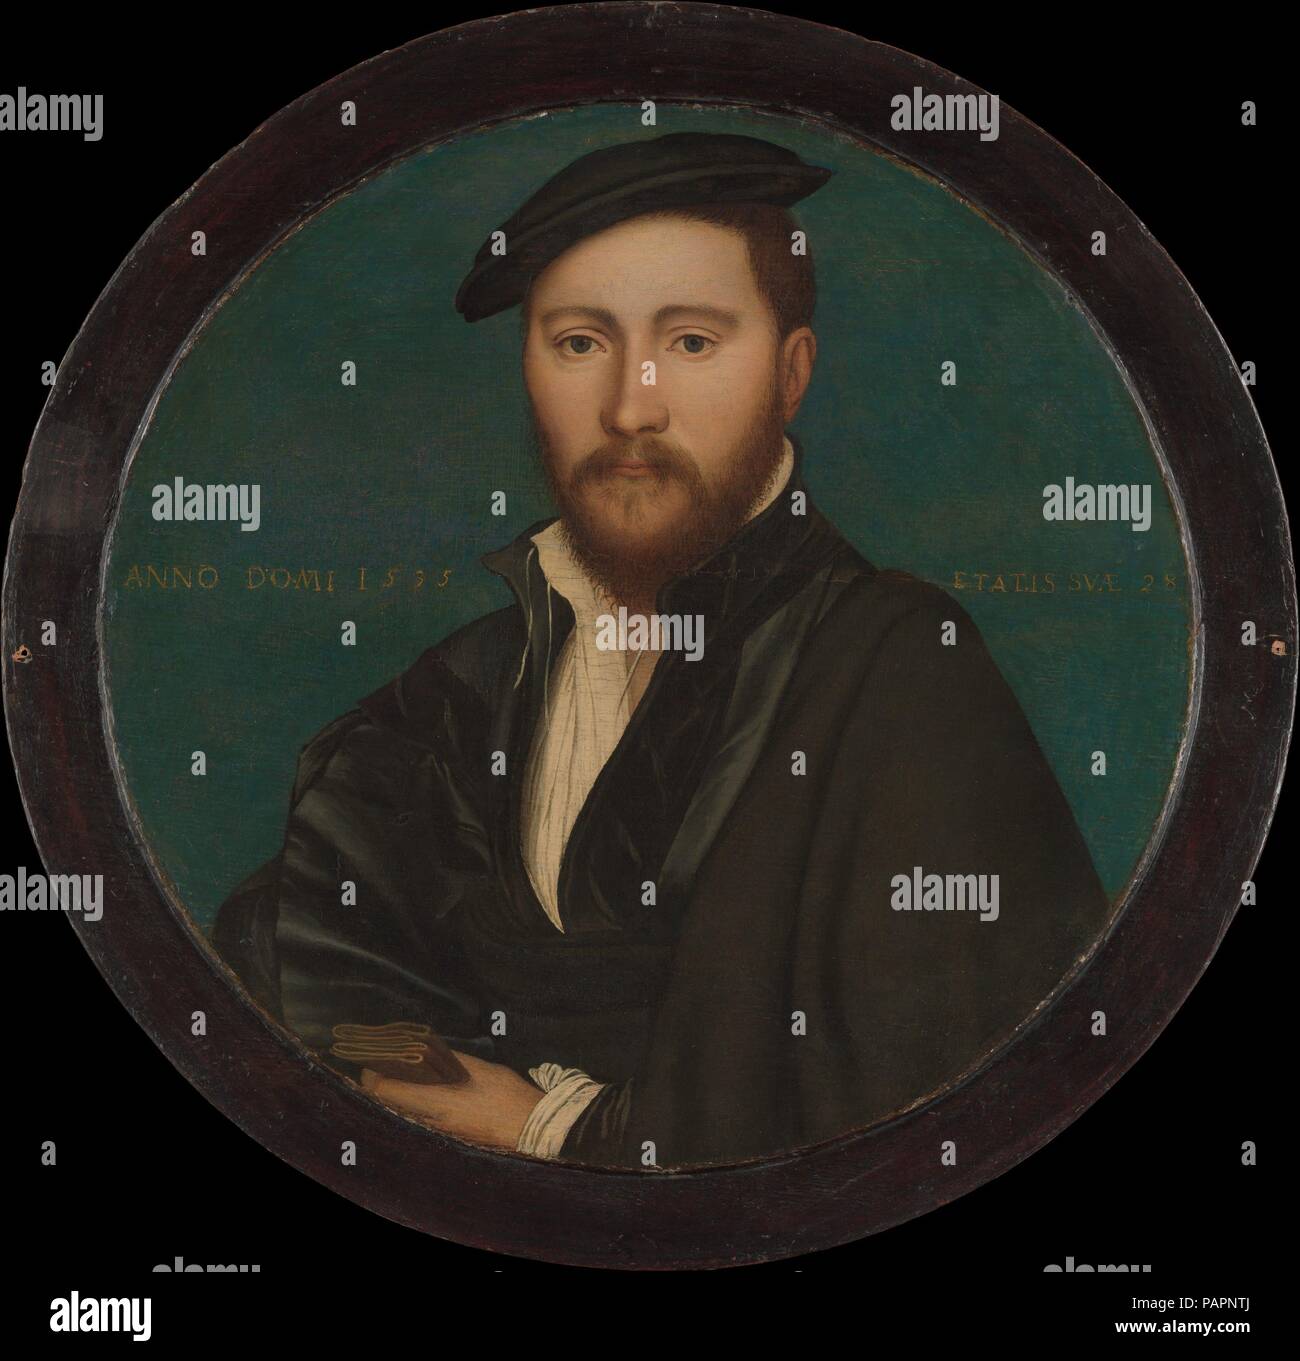 Portrait of a Man (Sir Ralph Sadler?). Artist: Workshop of Hans Holbein the Younger (German, Augsburg 1497/98-1543 London). Dimensions: Diameter 12 in. (30.5 cm). Date: 1535.  During his second sojourn in London (1532-43), Holbein catered primarily to Henry VIII's requests, but he also worked for many courtiers who were eager to have their portraits made by the king's painter. He began such commissions by capturing the likeness of the sitter on paper. This portrait of an unidentified twenty-eight-year-old man can be directly linked to a preparatory study (Royal Collection, Windsor Castle). The Stock Photo